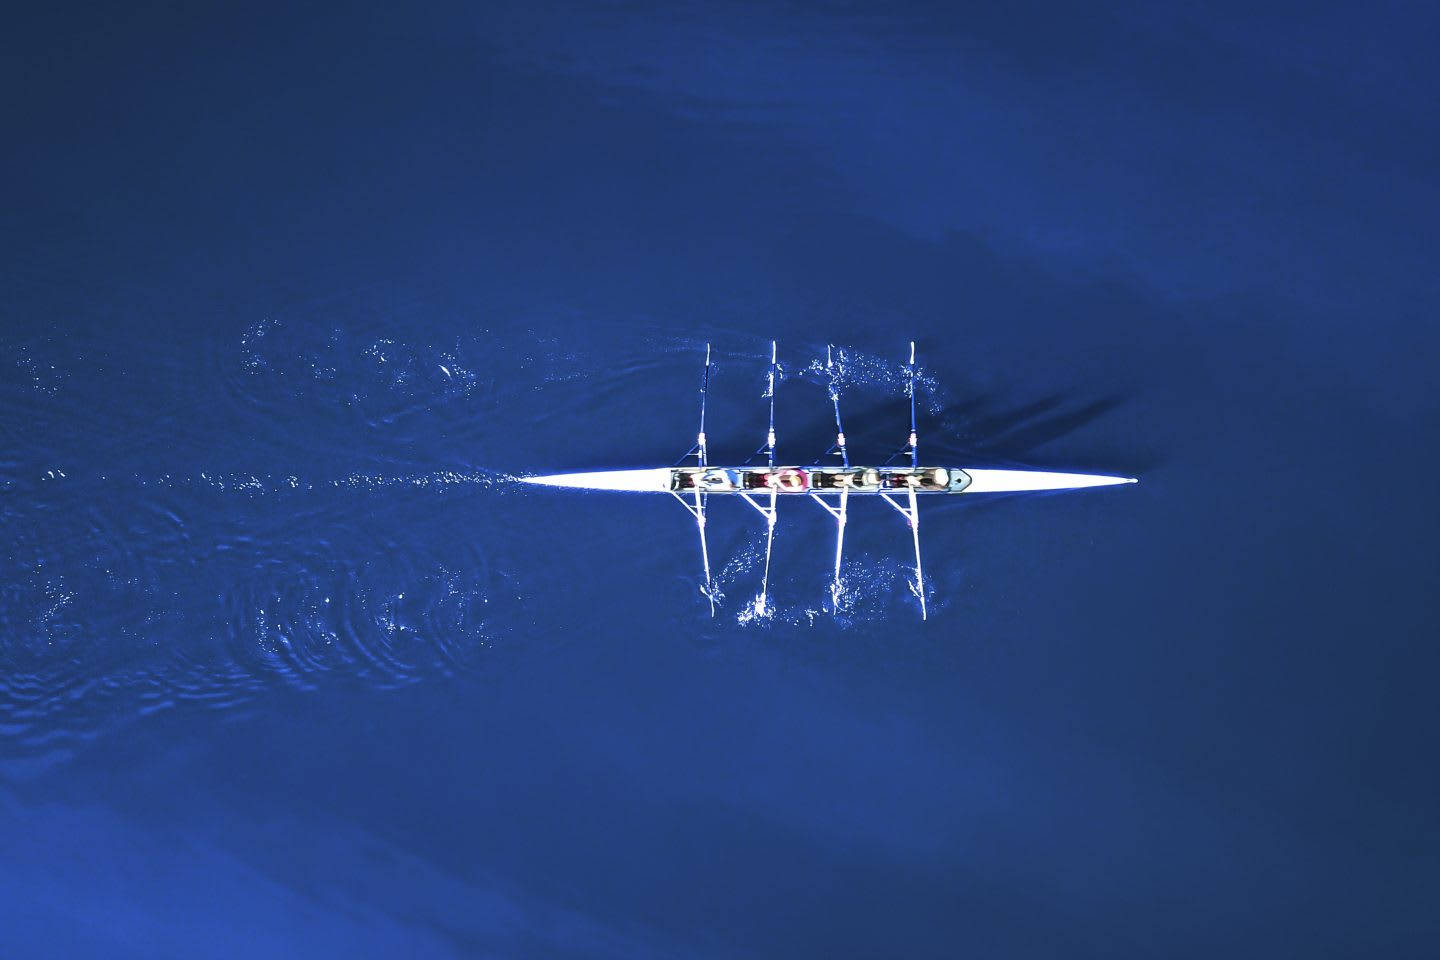 Rowing In The Sea Wallpaper